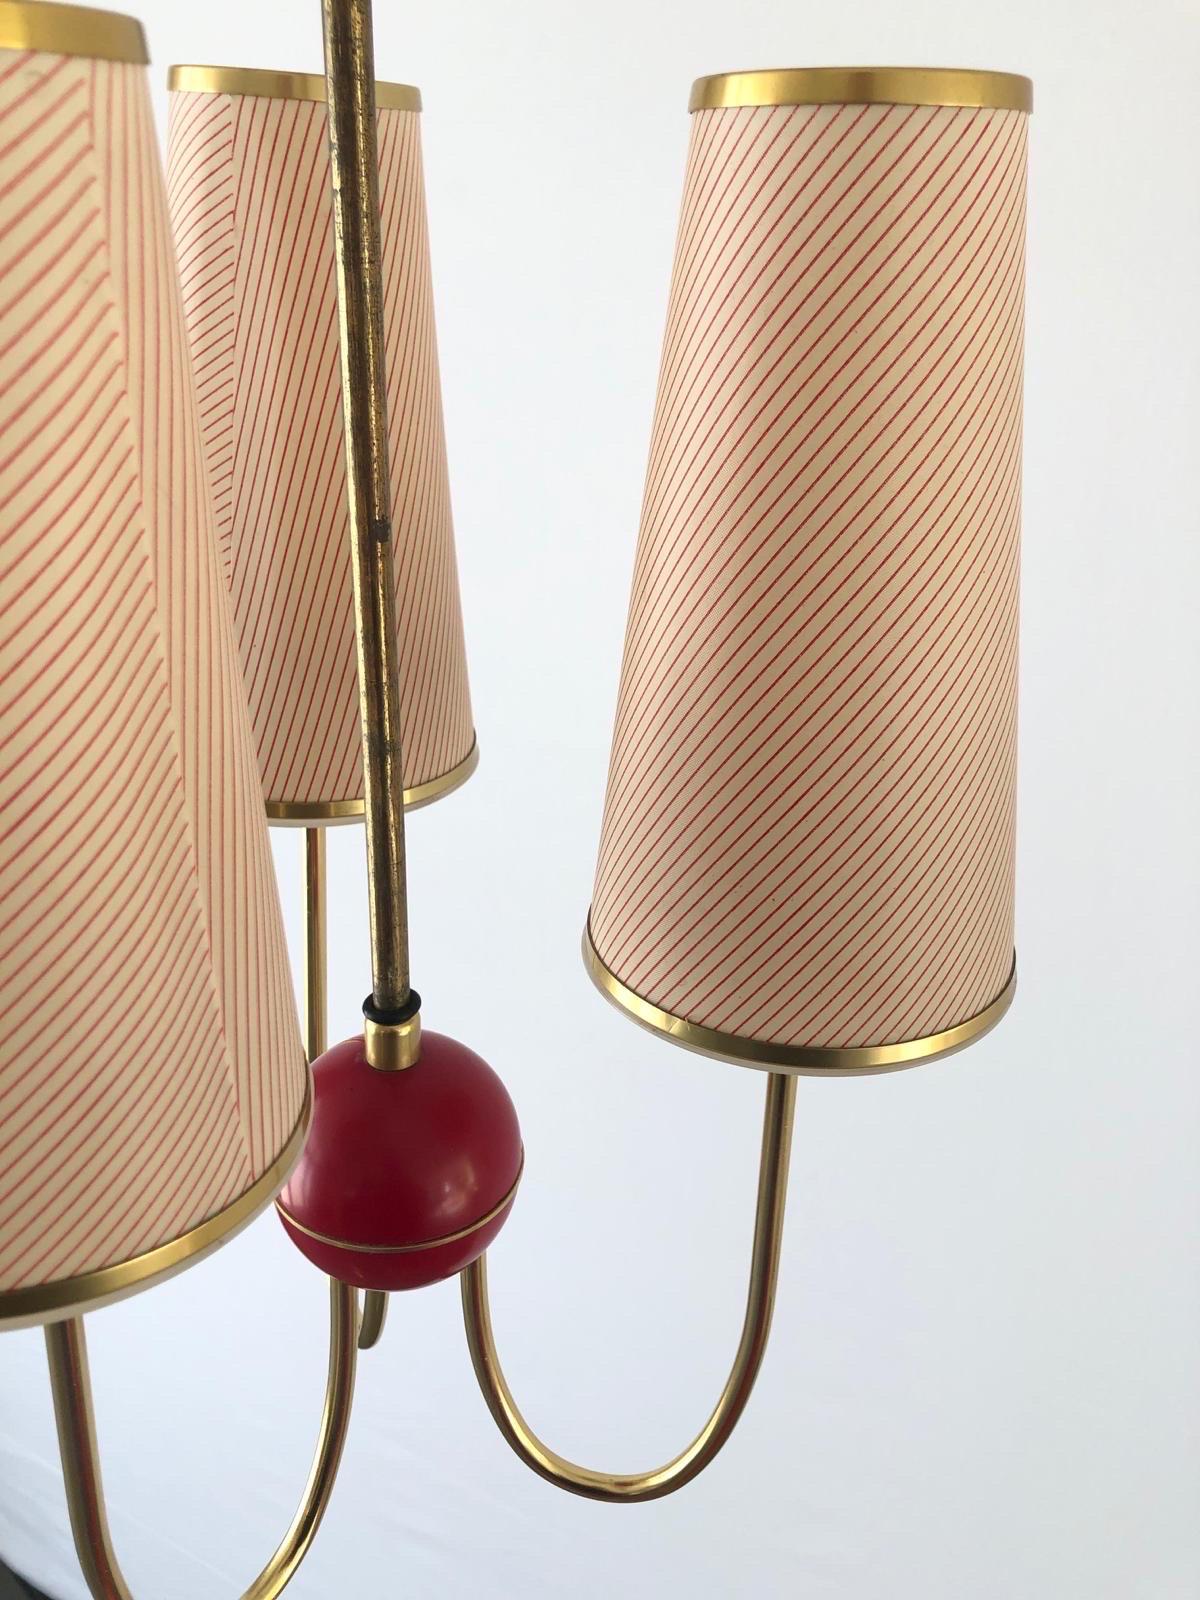 3-armed Fabric and Plastic Sputnik Pendant Lamp by Erco, 1950s, Germany In Good Condition For Sale In Hagenbach, DE